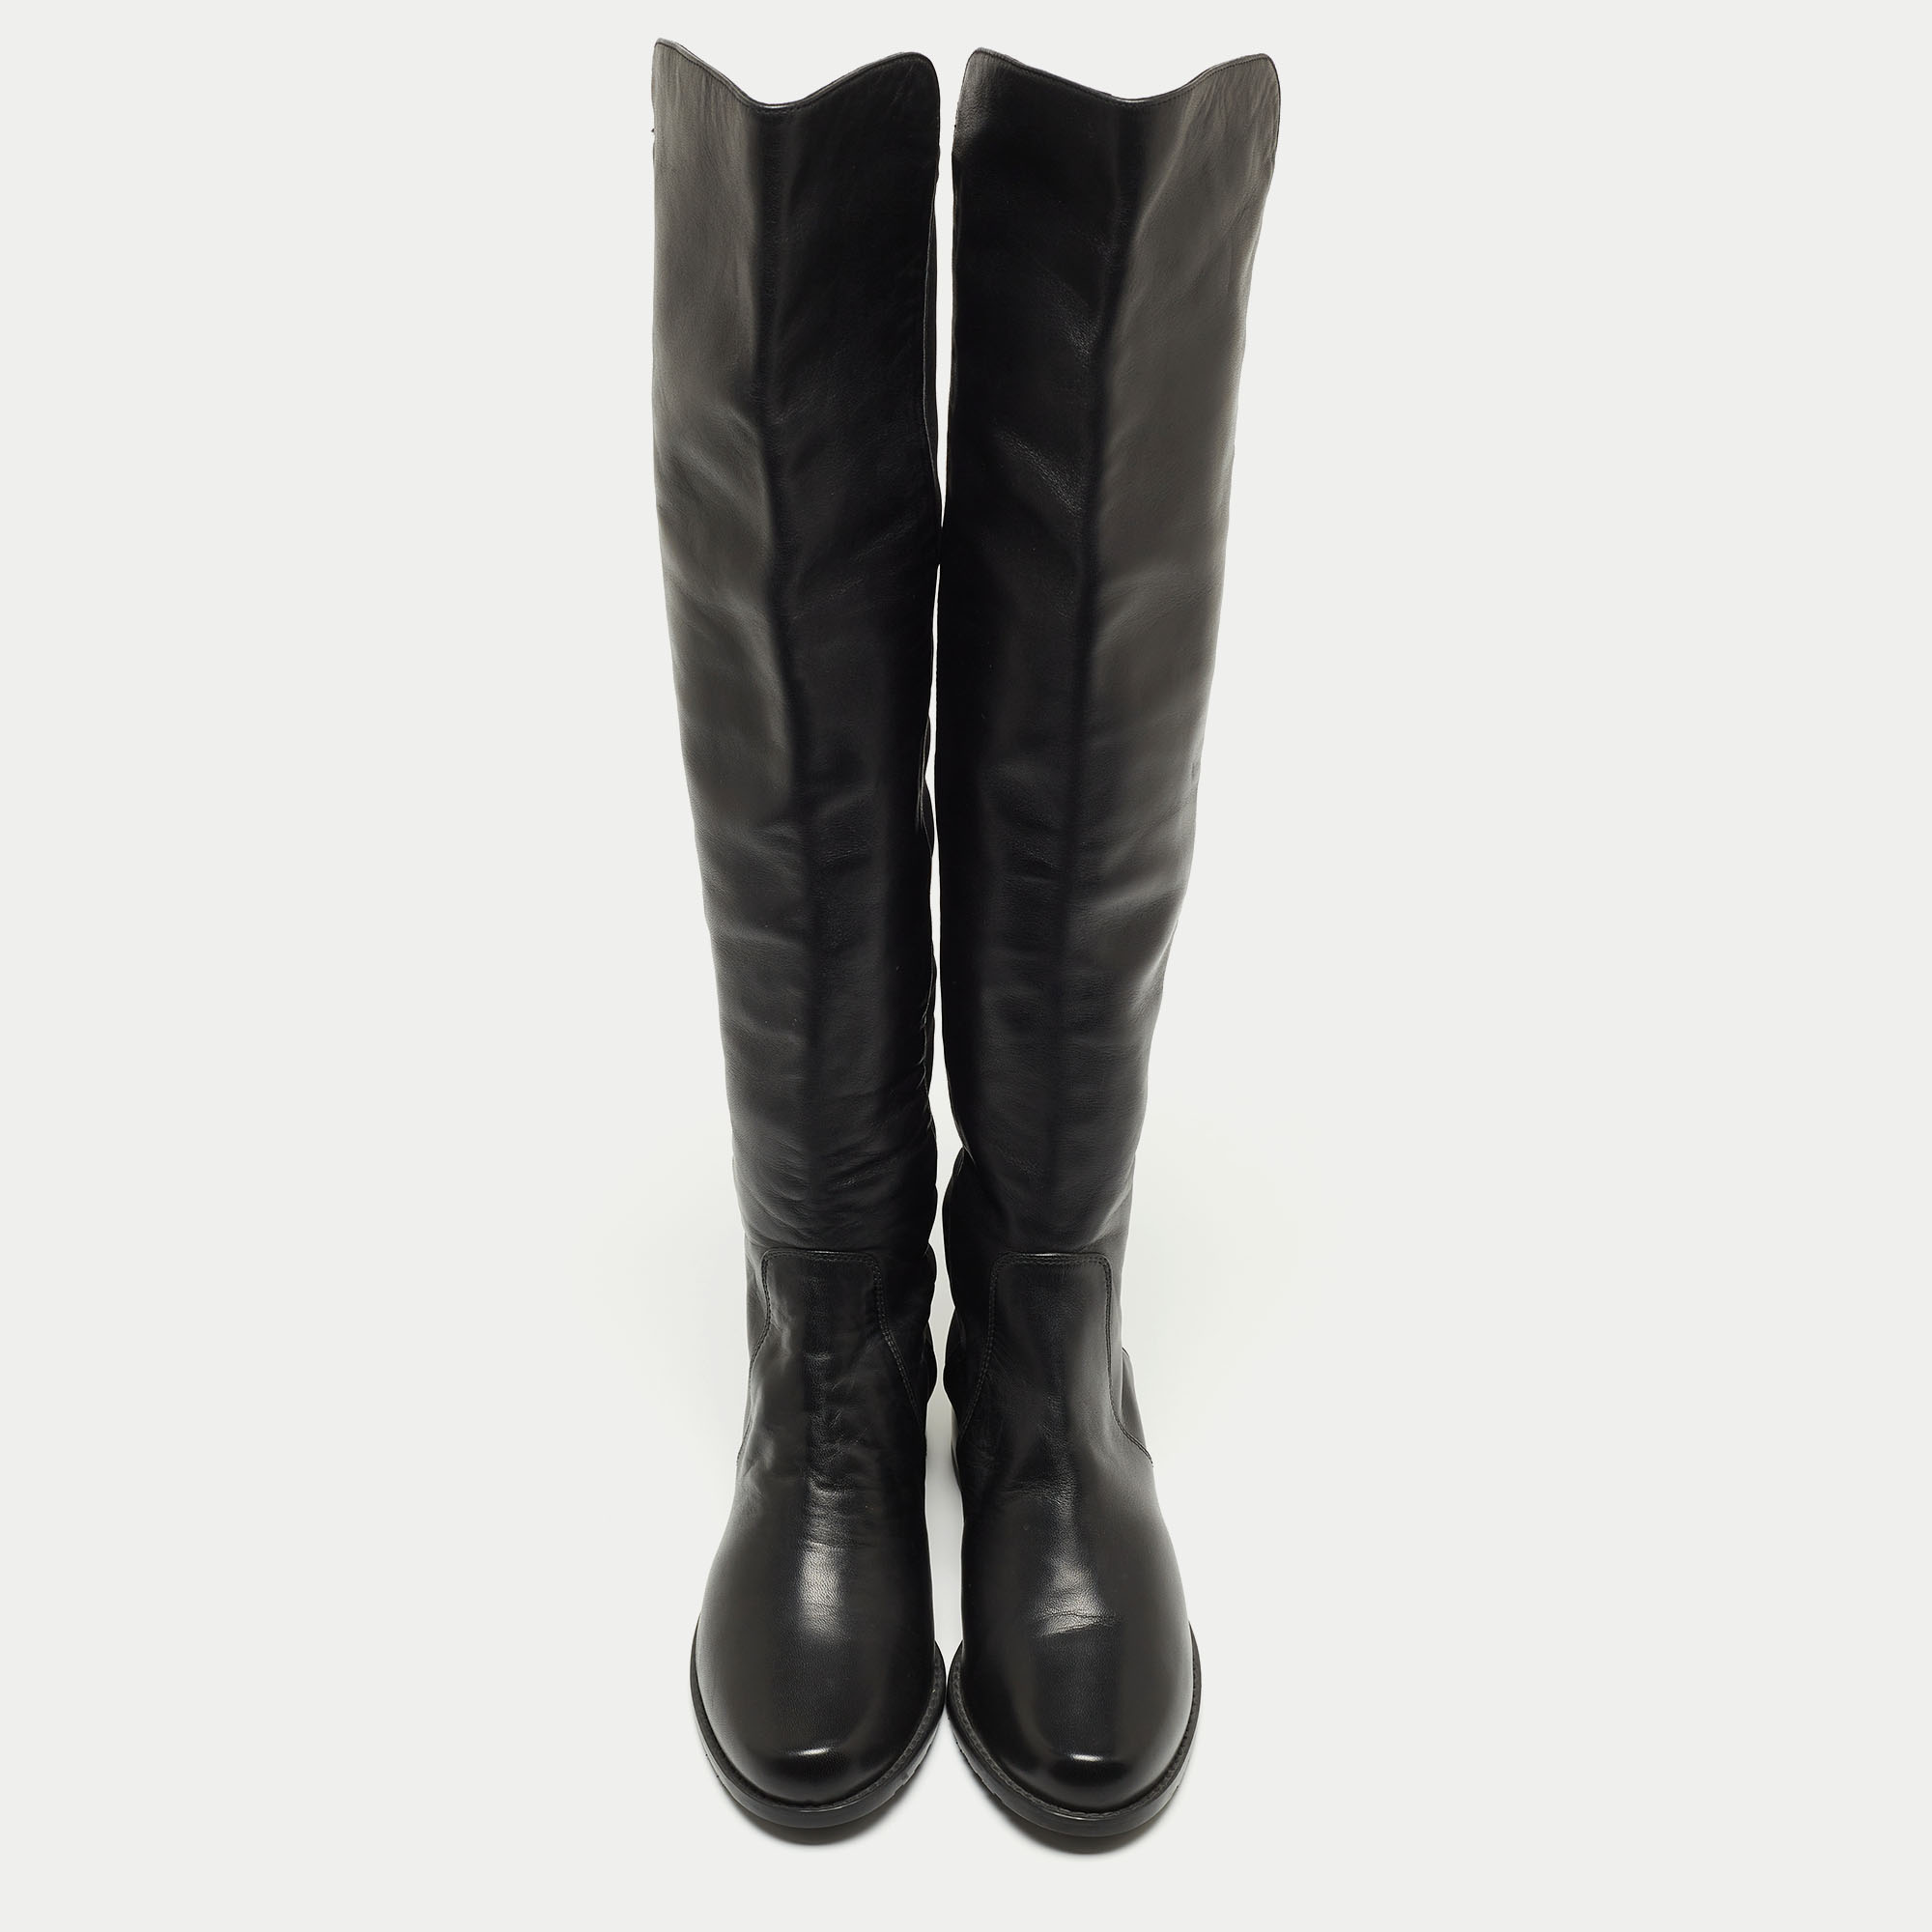 Stuart Weitzman Black Leather And Fabric Thigh High Boot Size 35